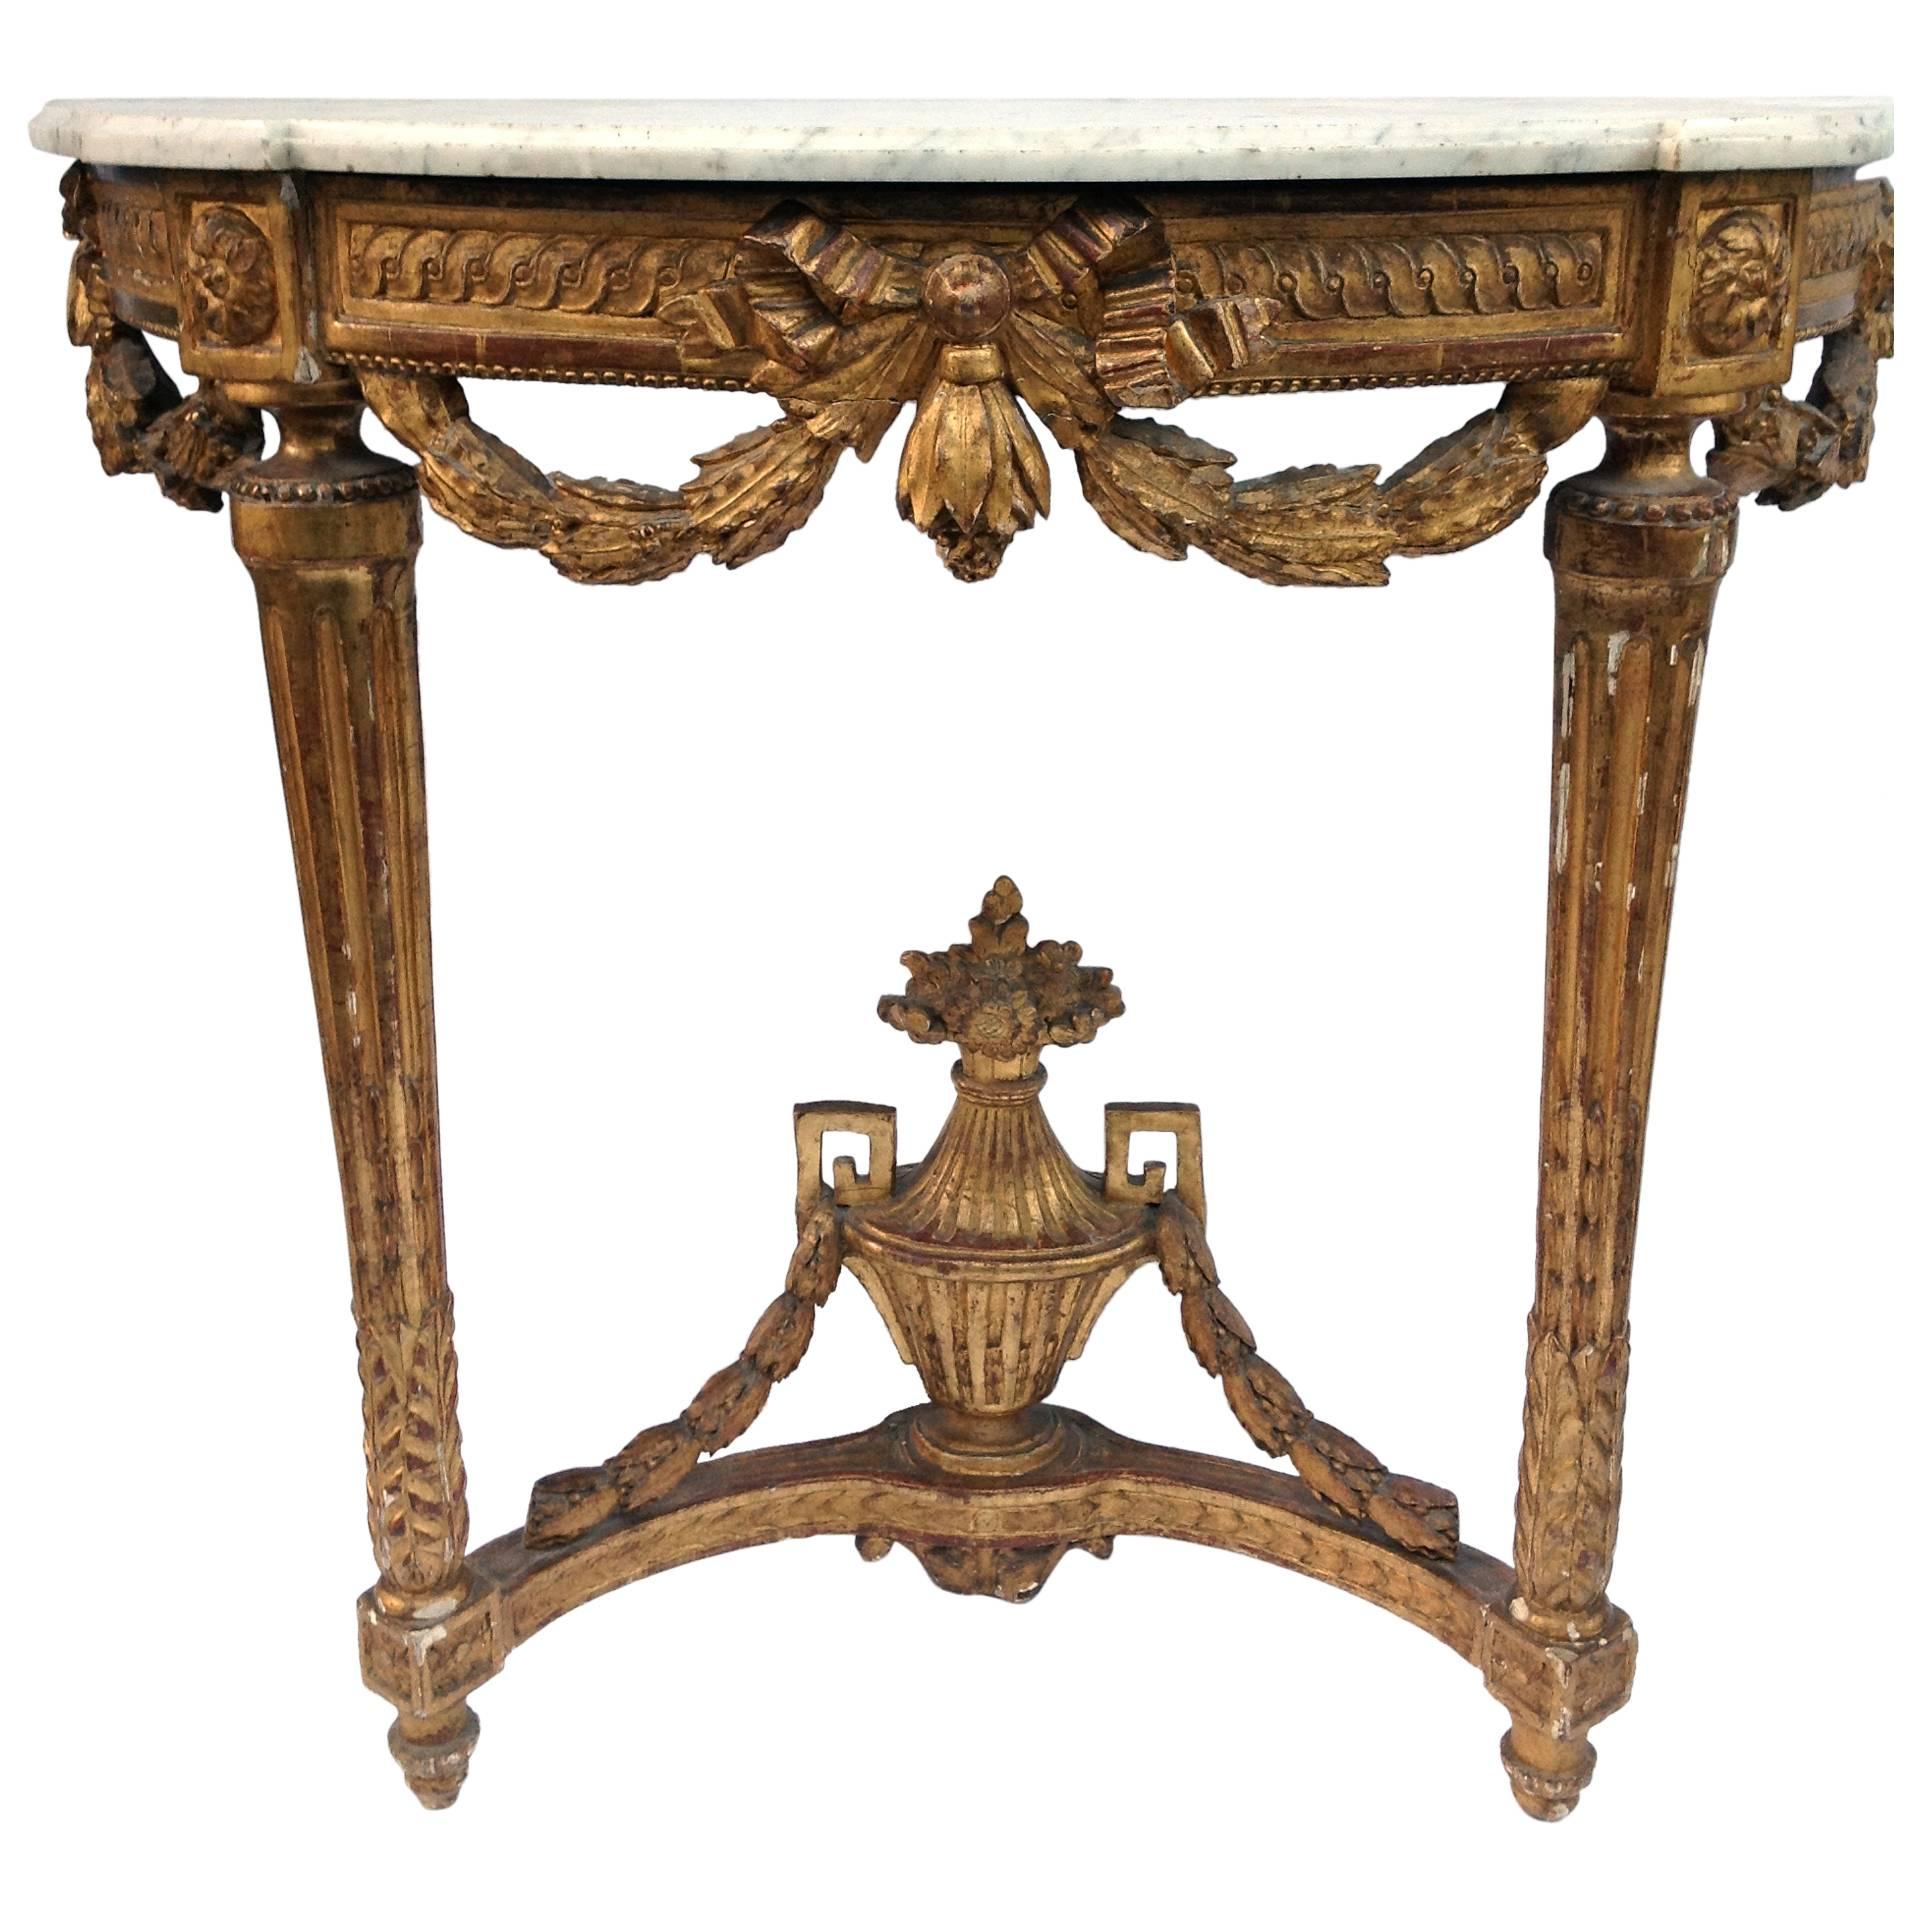 Louis XVI Period Carved Giltwood Console Table, 18th Century